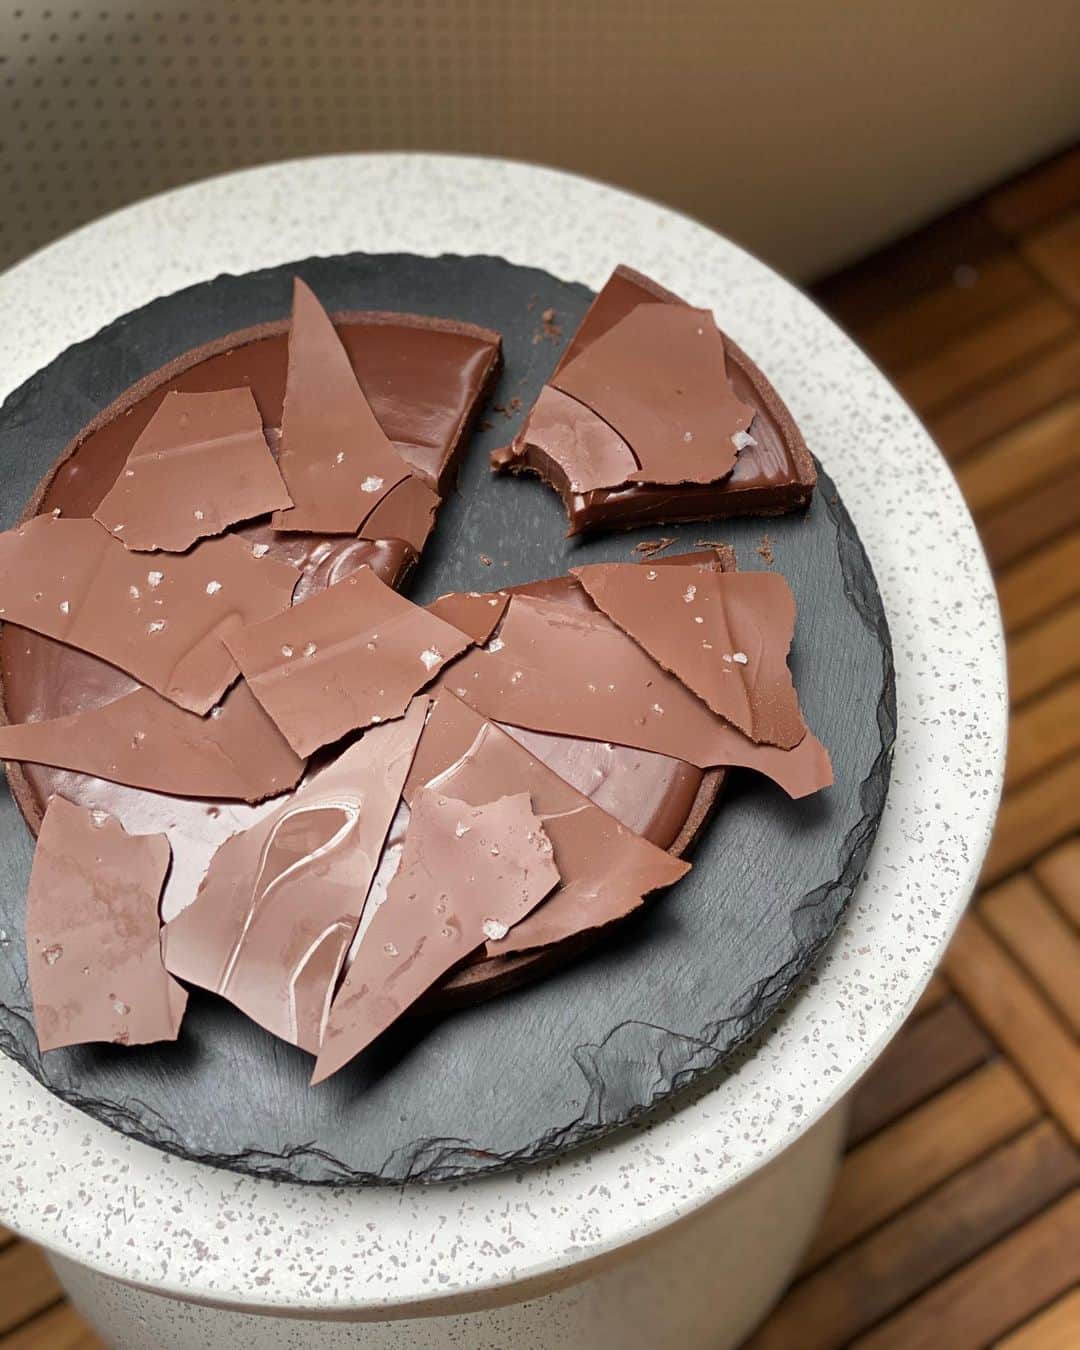 DOMINIQUE ANSEL BAKERYさんのインスタグラム写真 - (DOMINIQUE ANSEL BAKERYInstagram)「Had fun baking on @instagram Live with @phil.rosenthal & @lilyrosenthal to make a Gianduja (Hazelnut Milk Chocolate) Tart to raise funds for @wckitchen. Just in time for (my first!) Father’s Day and my little boy finally home. 😊 Working on getting the full video up but here’s the recipe. Hope you’ll bake it for people you love too. (It’s also in my book #EveryoneCanBake). / FOR GANACHE 1¼ cup heavy cream ¼ cup whole milk 15½ oz (2½ cups) Gianduja* *If you don't have Gianduja, use 11oz dark chocolate & stir in 4.5tsp unsalted butter at the end.  EQUIPMENT Pot Mixing bowl Whisk  1. Combine cream & milk in pot, bring to boil over medium heat. Remove from heat. 2. Place chocolate in bowl. Pour hot cream mixture over chocolate. Let stand 30 sec. Whisk til chocolate is melted & mixture is smooth. / FOR TART SHELL 1½ cups AP flour + more for dusting 2/3 cup powdered sugar 5¼ tbsp cornstarch ¼ tsp salt ½ vanilla bean (or ½ tsp extract) 2½ tbsp unsweetened cocoa powder 10 tbsp unsalted butter, cubed, room temp 1 large egg  EQUIPMENT 8-in tart ring/pan Rolling pin Mixing bowl  1. Combine flour, powdered sugar, cornstarch, salt, vanilla, & cocoa powder in bowl. Add butter, mix w/ your hands (or stand/hand mixer) til butter is size of peas & ingredients combined. Add egg, mix w/ spatula til smooth. Don’t overmix. 2. Transfer dough onto plastic wrap. Shape into a ball. Wrap up & flatten into a disc. Refrigerate 30 min til cold & pliable. 3. Preheat oven to 350F. 4. Flour work surface & rolling pin. Unwrap dough, roll to 1/8 in thick square. Work quickly (add flour if dough sticks). 5. Cut into a round 1 in wider than tart ring. 6. Fonçage dough: Butter tart ring/pan. If using ring, line sheet pan w/ parchment. Set ring in center (no need to do this if using tart pan w/ bottom). Place dough on ring/pan, push down gently w/ your fingers, pressing dough along inside of ring/pan & into edges. Keep even thickness. Trim away excess w/ paring knife (if dough is warm, return to fridge for 15 min). 7. Line shell w/ parchment/coffee filter (fully cover dough). Fill w/ uncooked rice/dried beans. Bake til light golden, 15-20 min. 8. Cool 3 min. Unmold, let fully cool before filling.」6月21日 9時44分 - dominiqueansel